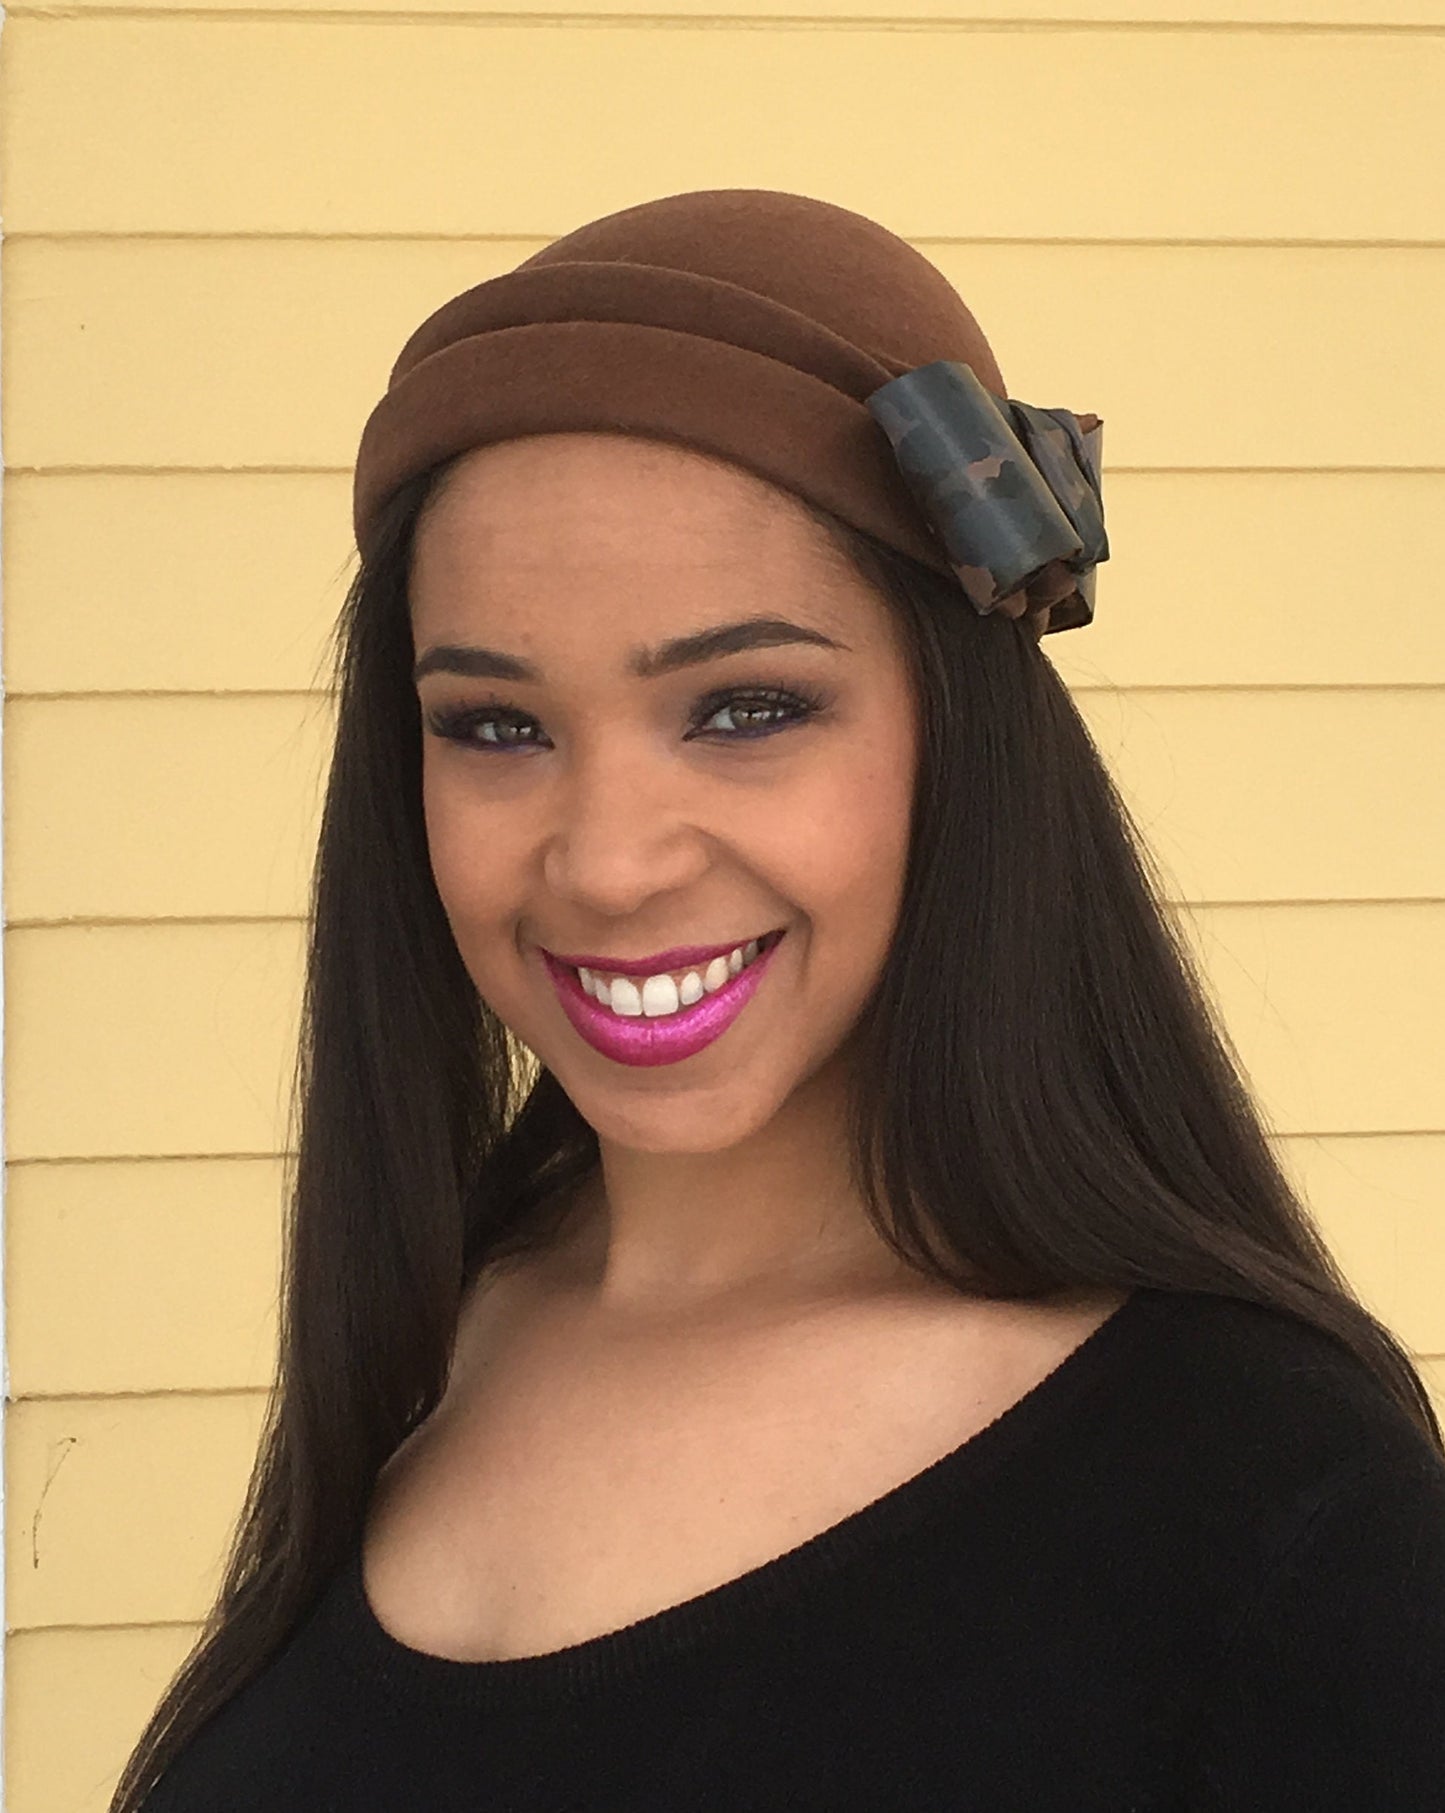 Rich Brown Taupe Wool Felt Sculptured hat with Leather Camouflage Bow. Chic Fall and Winter Hat-Fall Races-Saratoga- Polo Matches-Church Hat